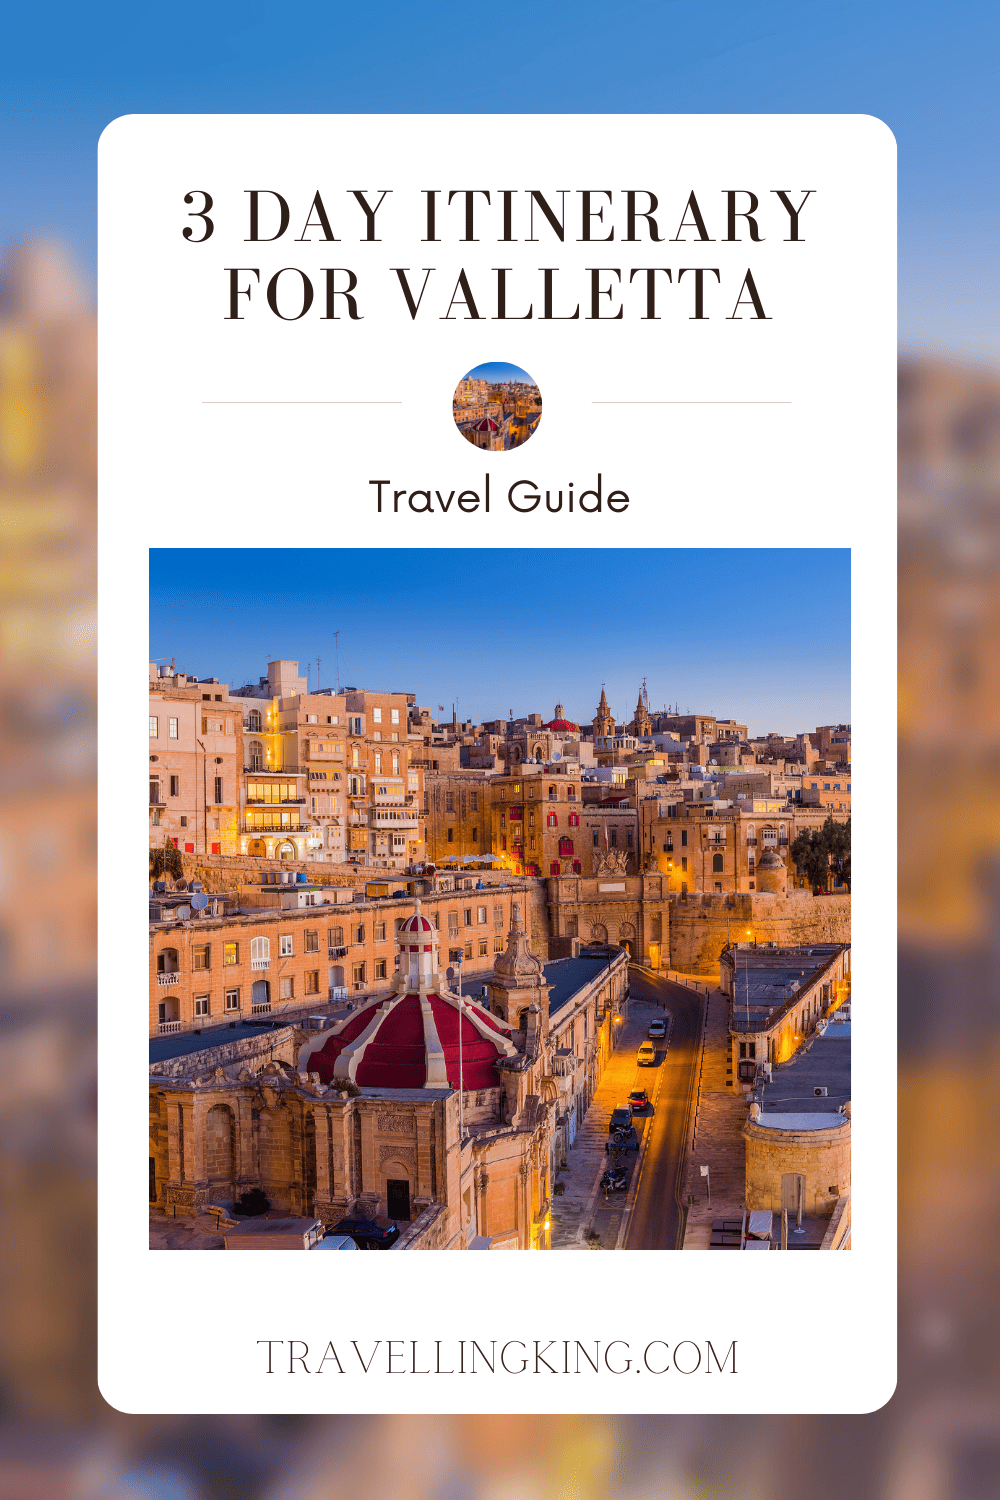 3 Day Itinerary for Valletta